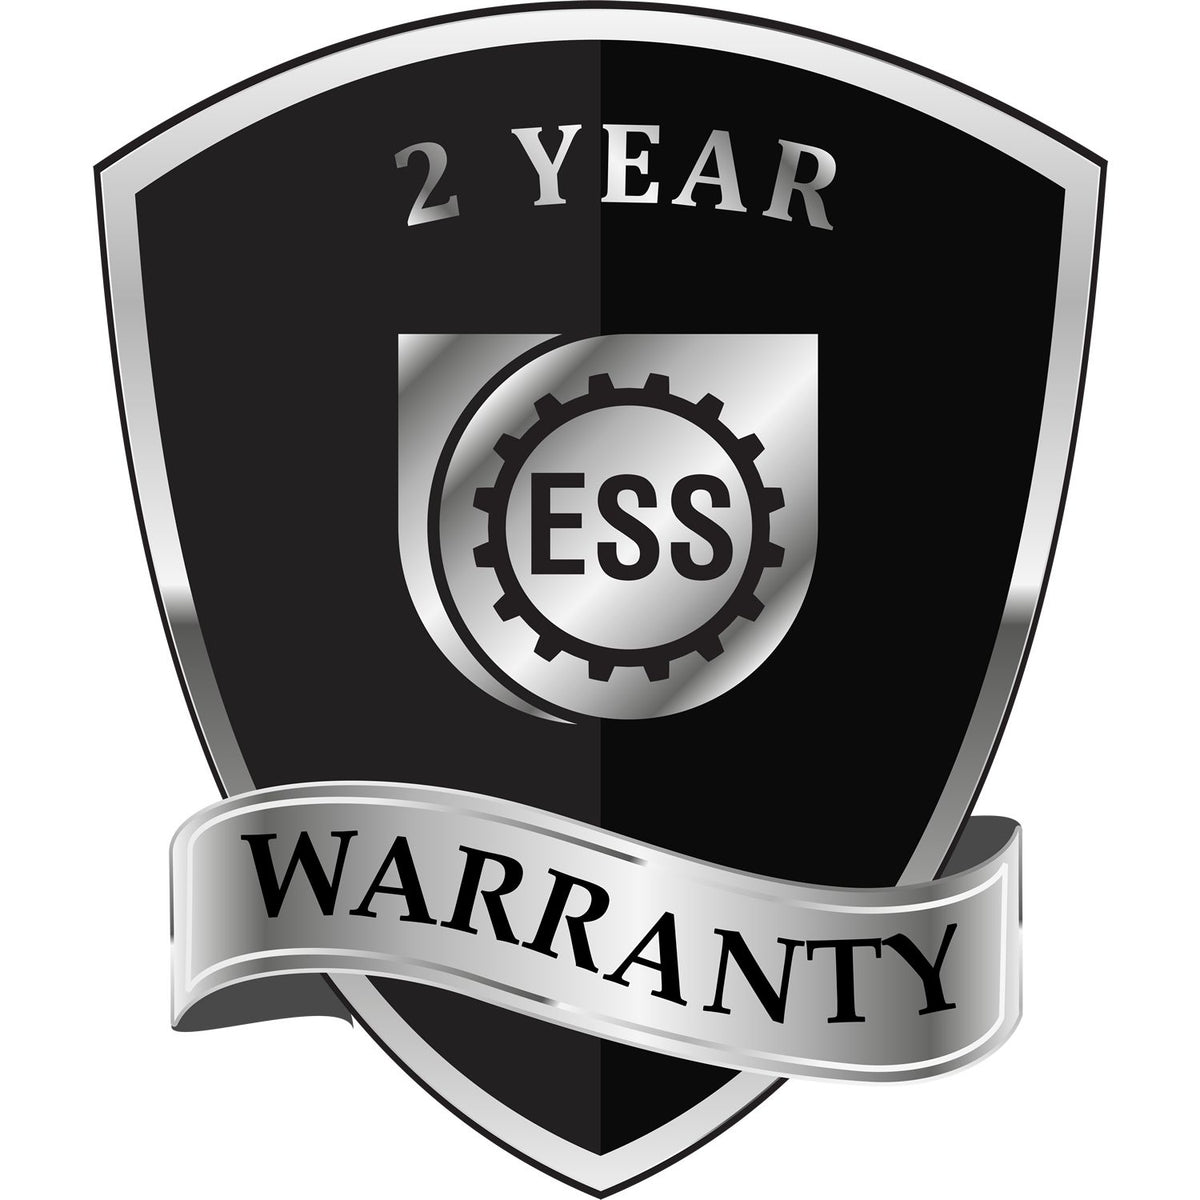 A black and silver badge or emblem showing warranty information for the Soft Maine Professional Geologist Seal